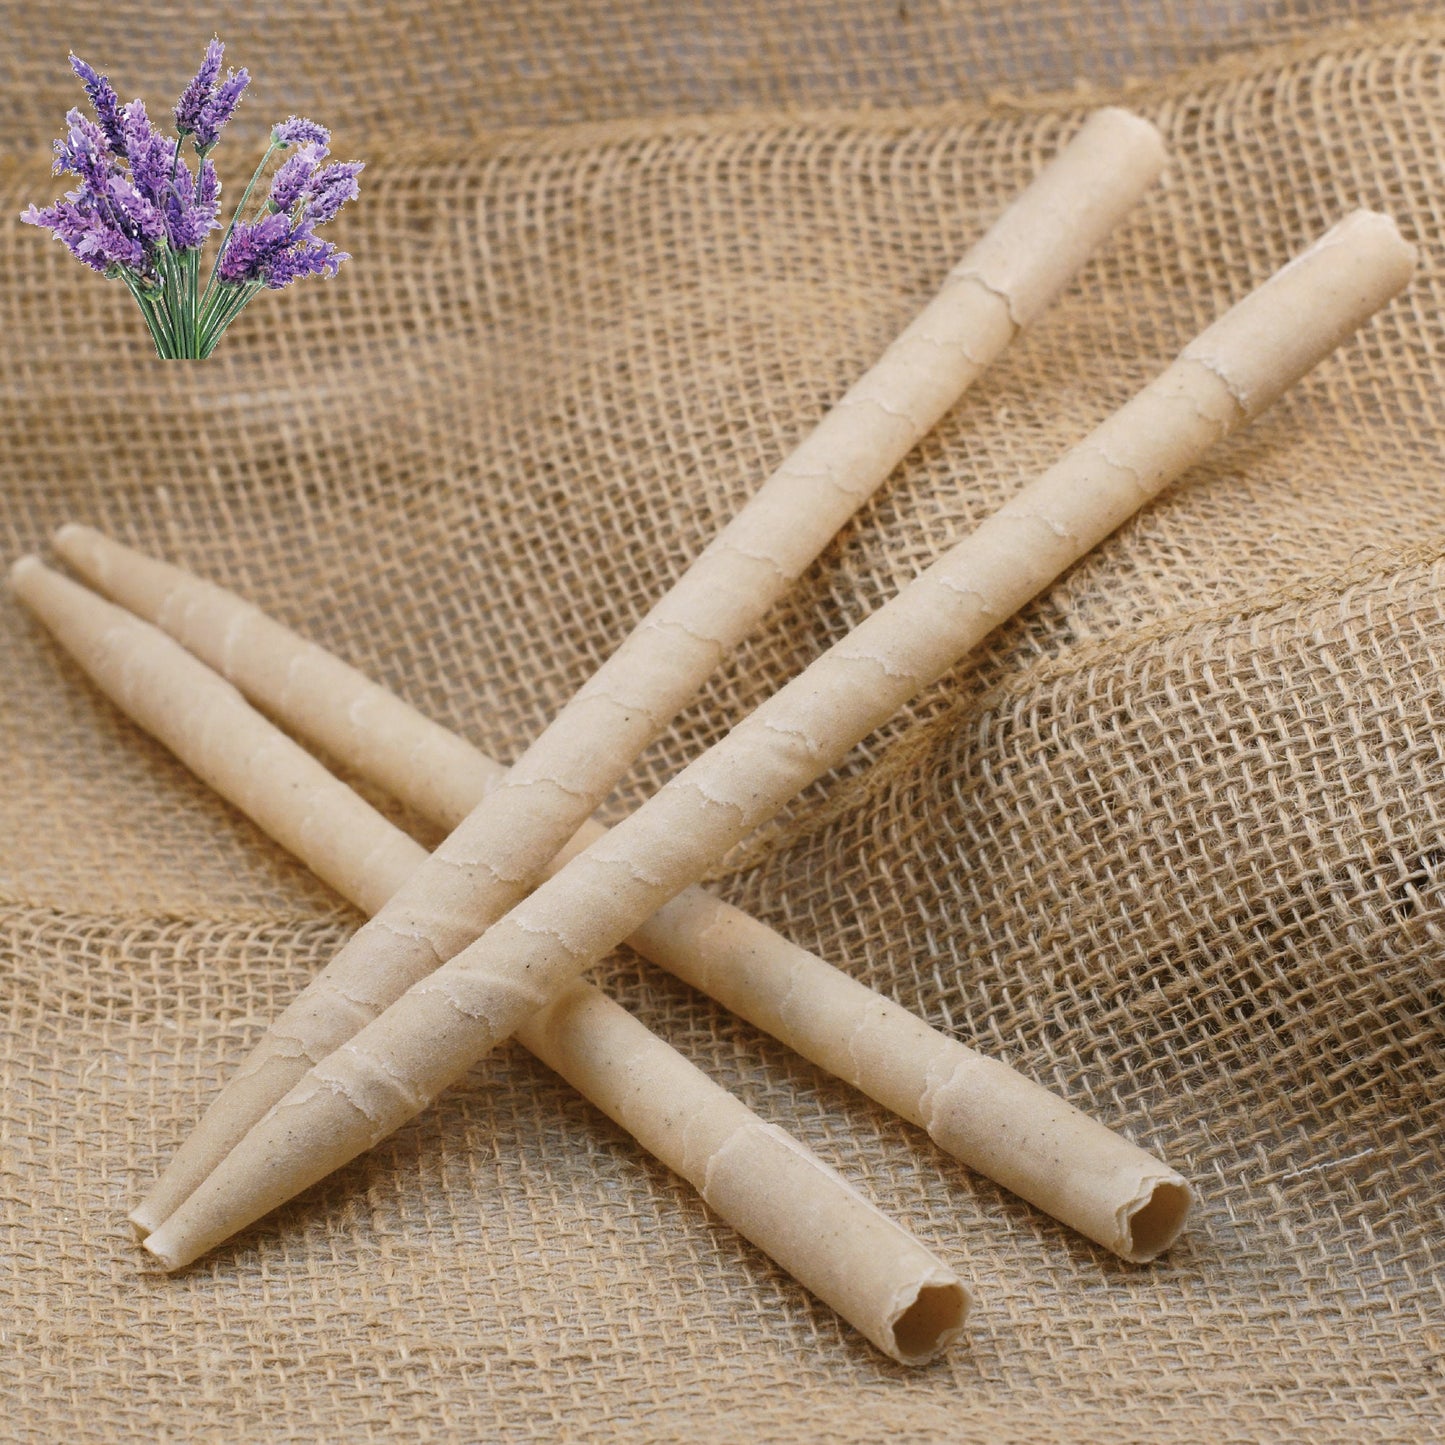 Ear Candles Infused with Lavender Essential Oils - Made in the USA